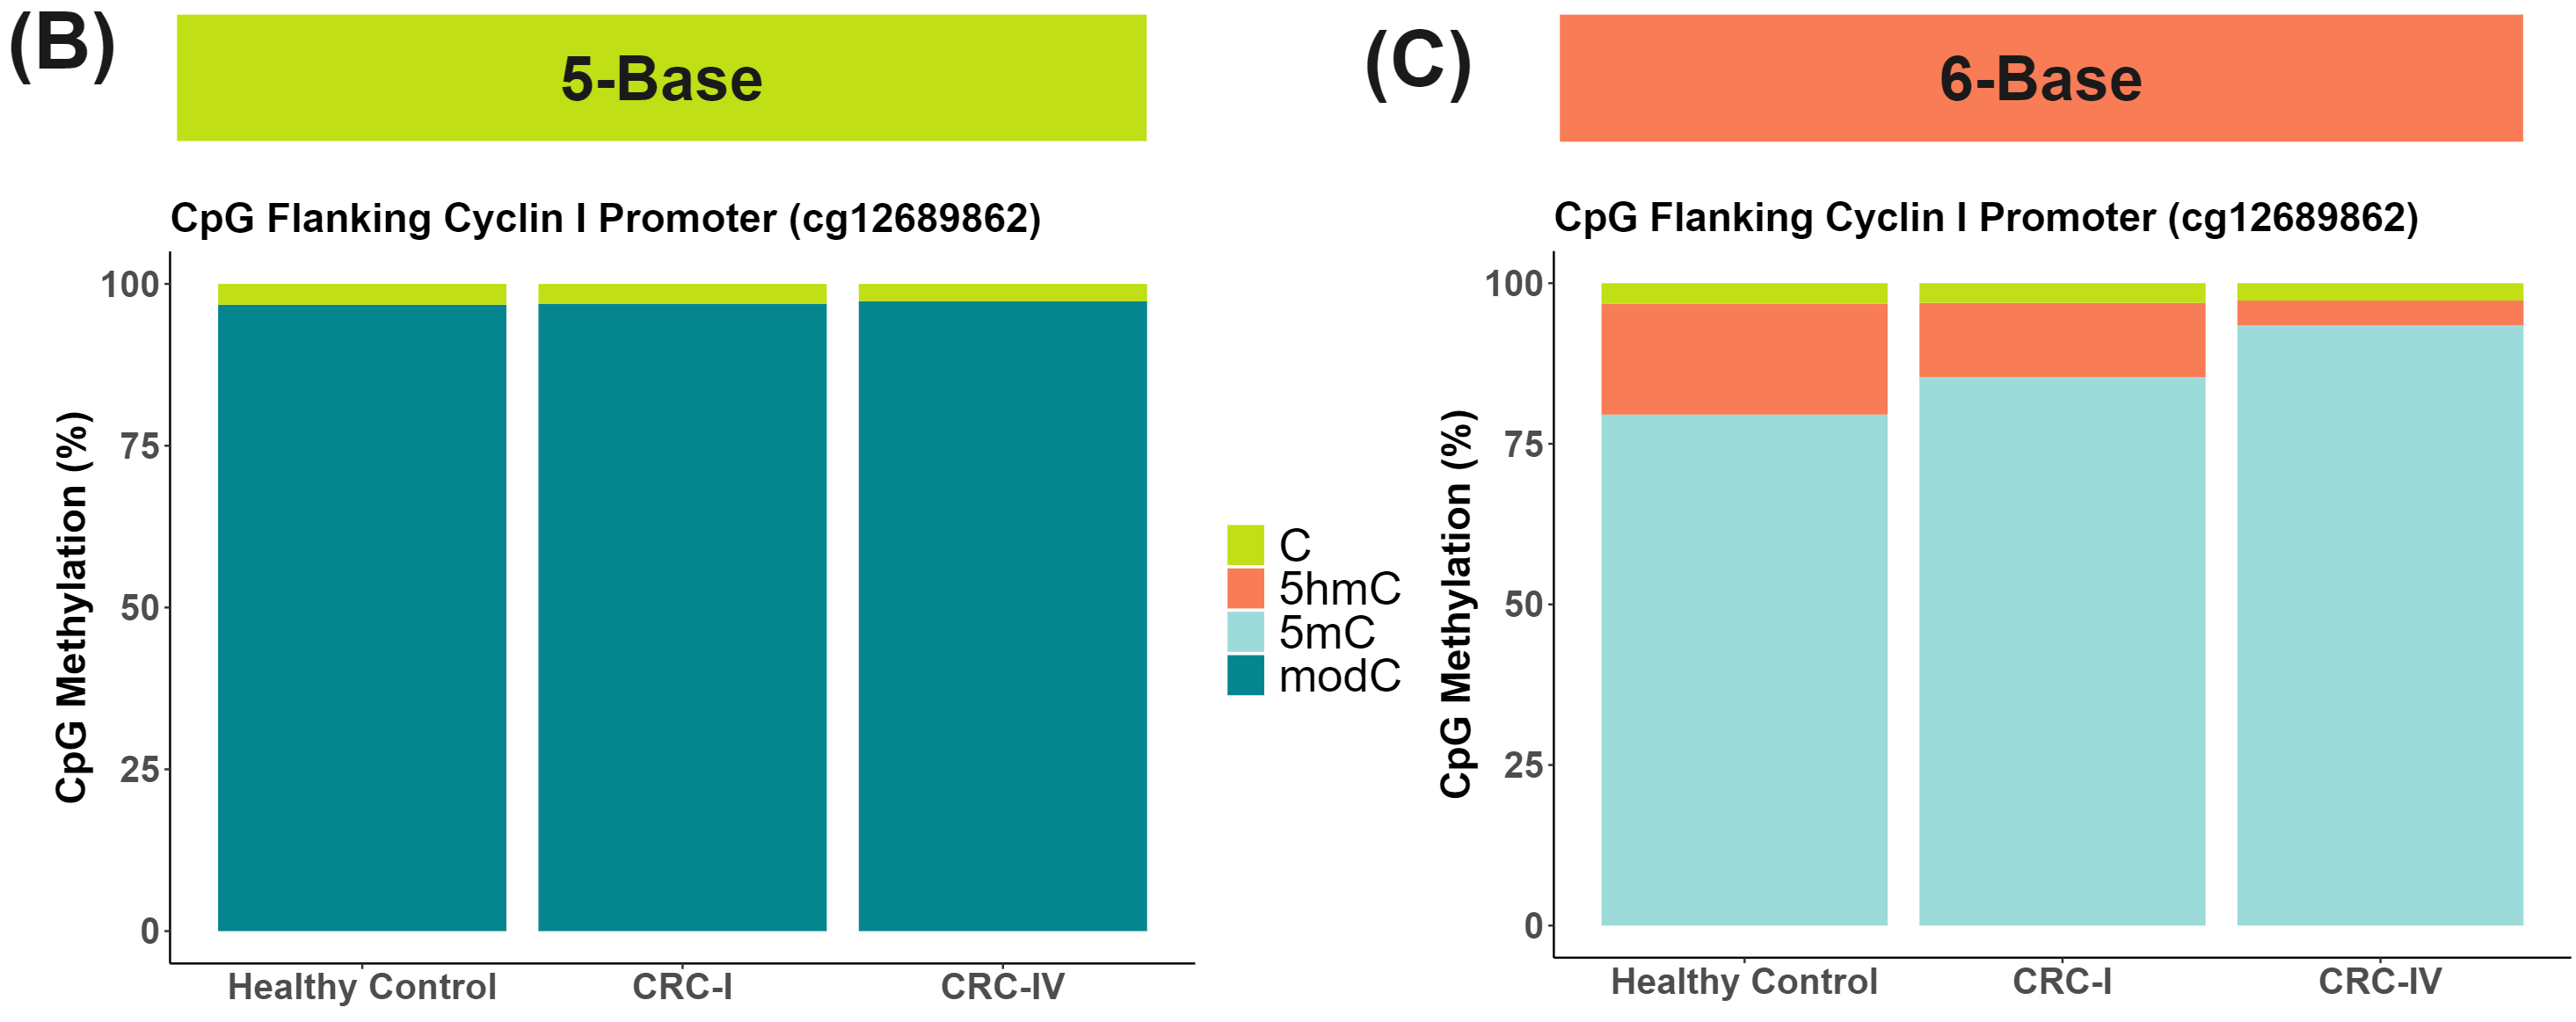 CpG methylation % in Cyclin-1 promoter flanking regions using 5-base and 6-base detection